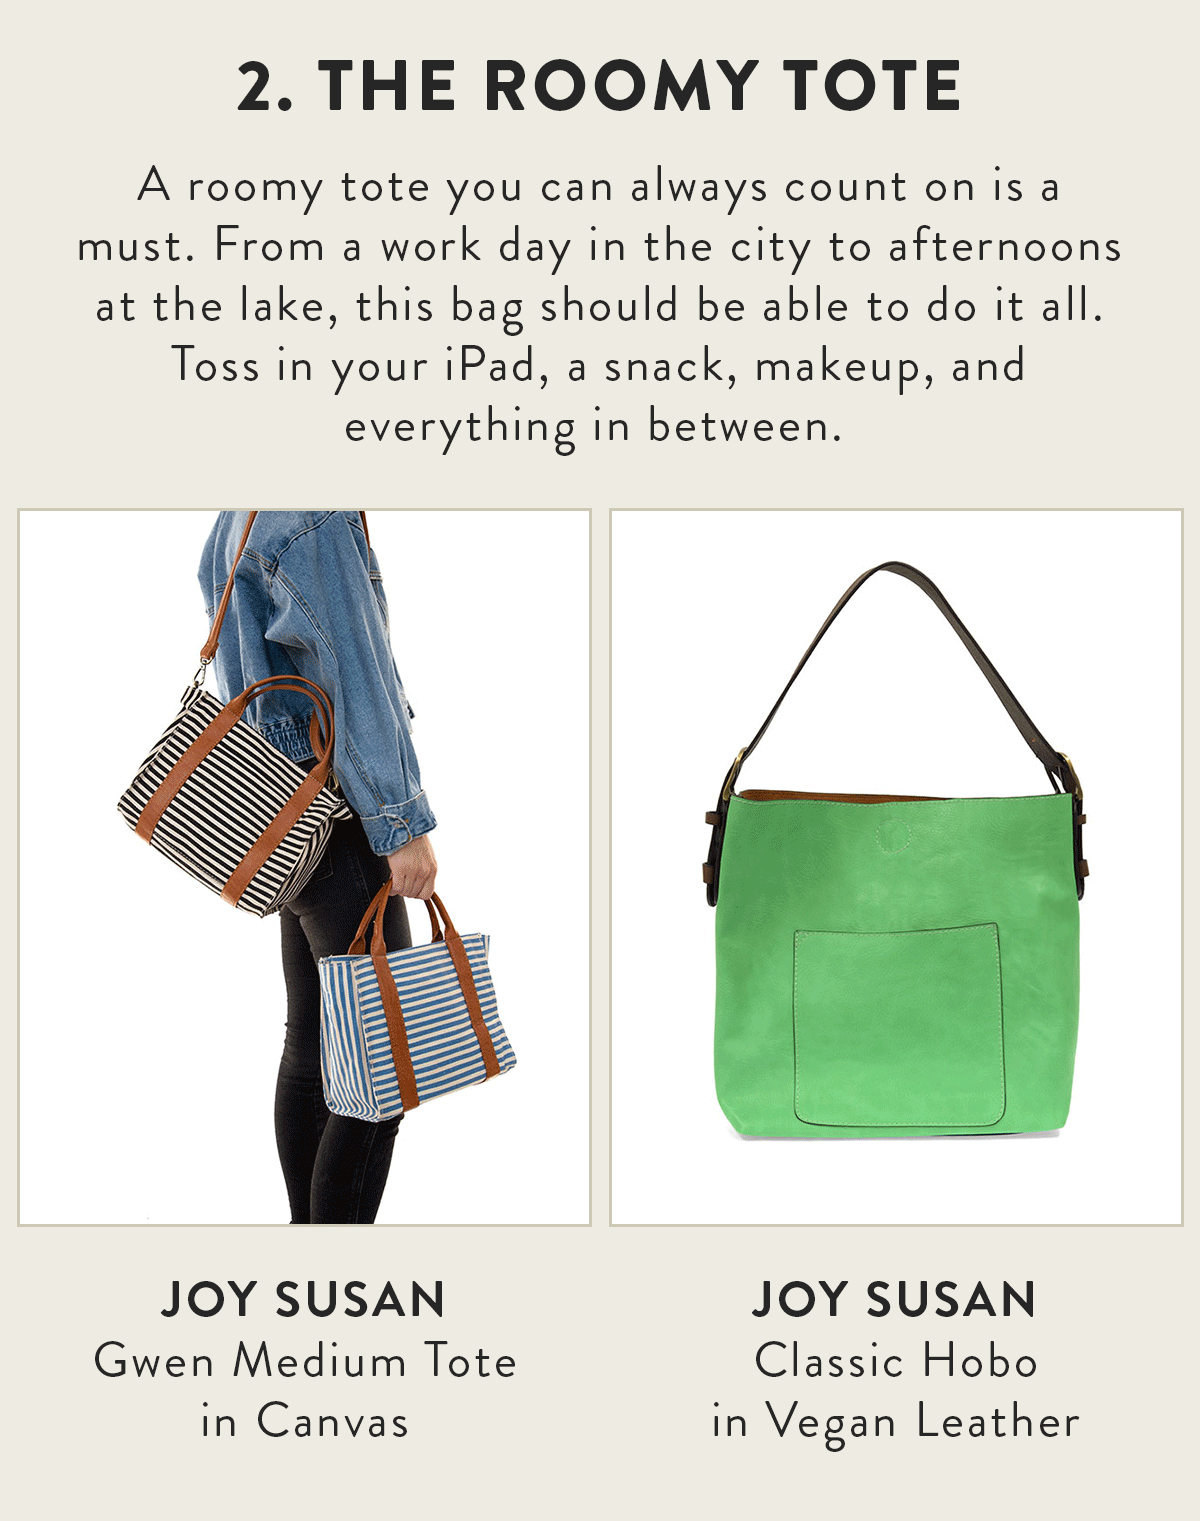 5 bags every woman should own - the roomy tote